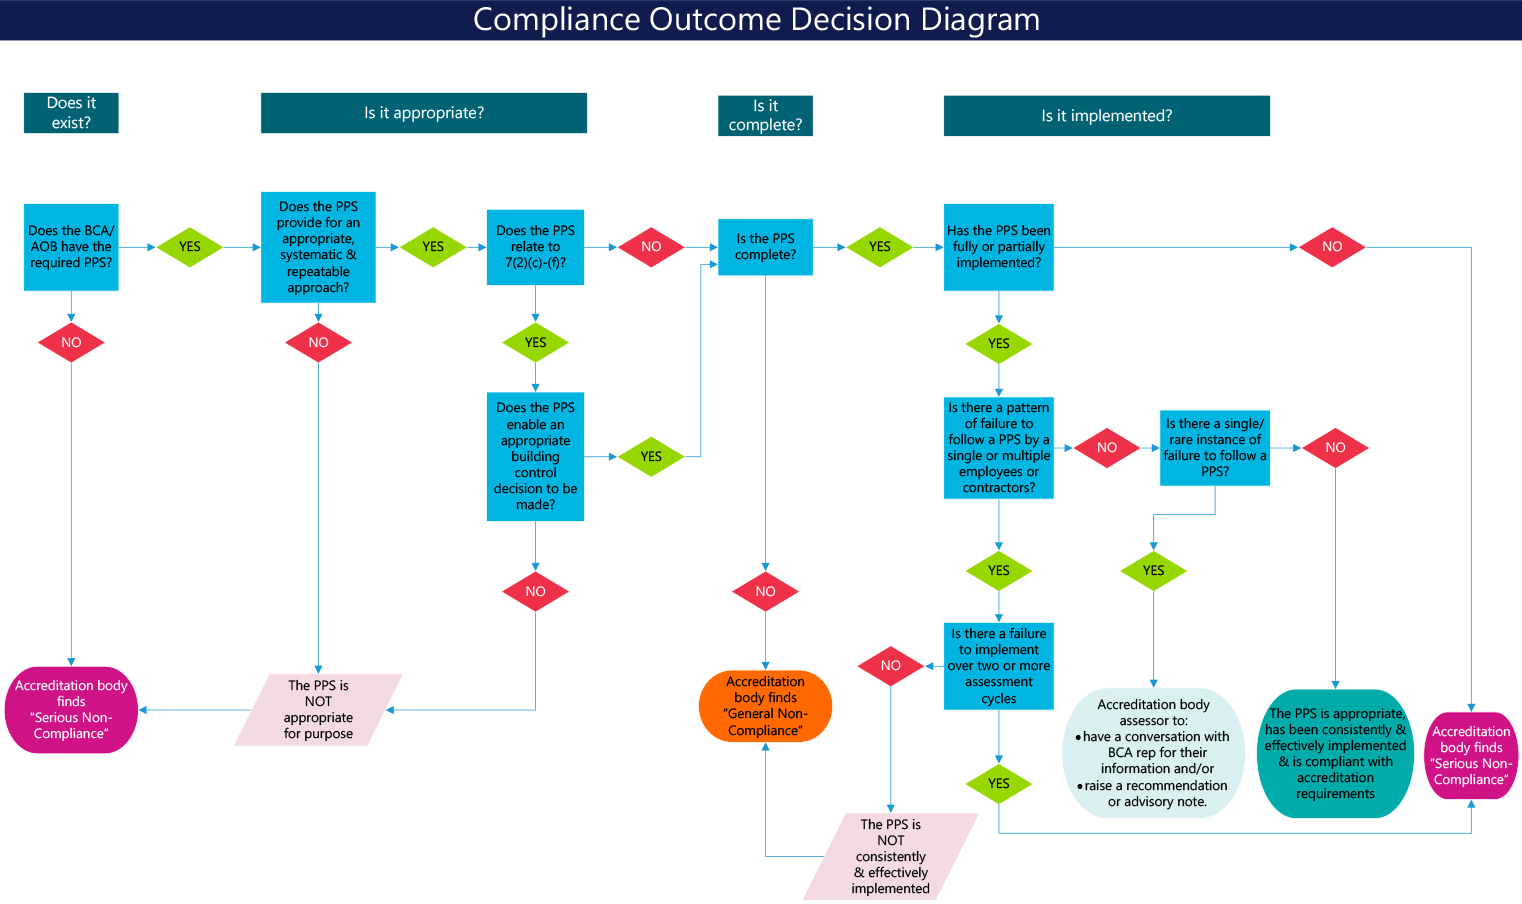 Compliance Outcome Decision Diagram – flowchart. A visual representation of information that is presented as HTML text on this page